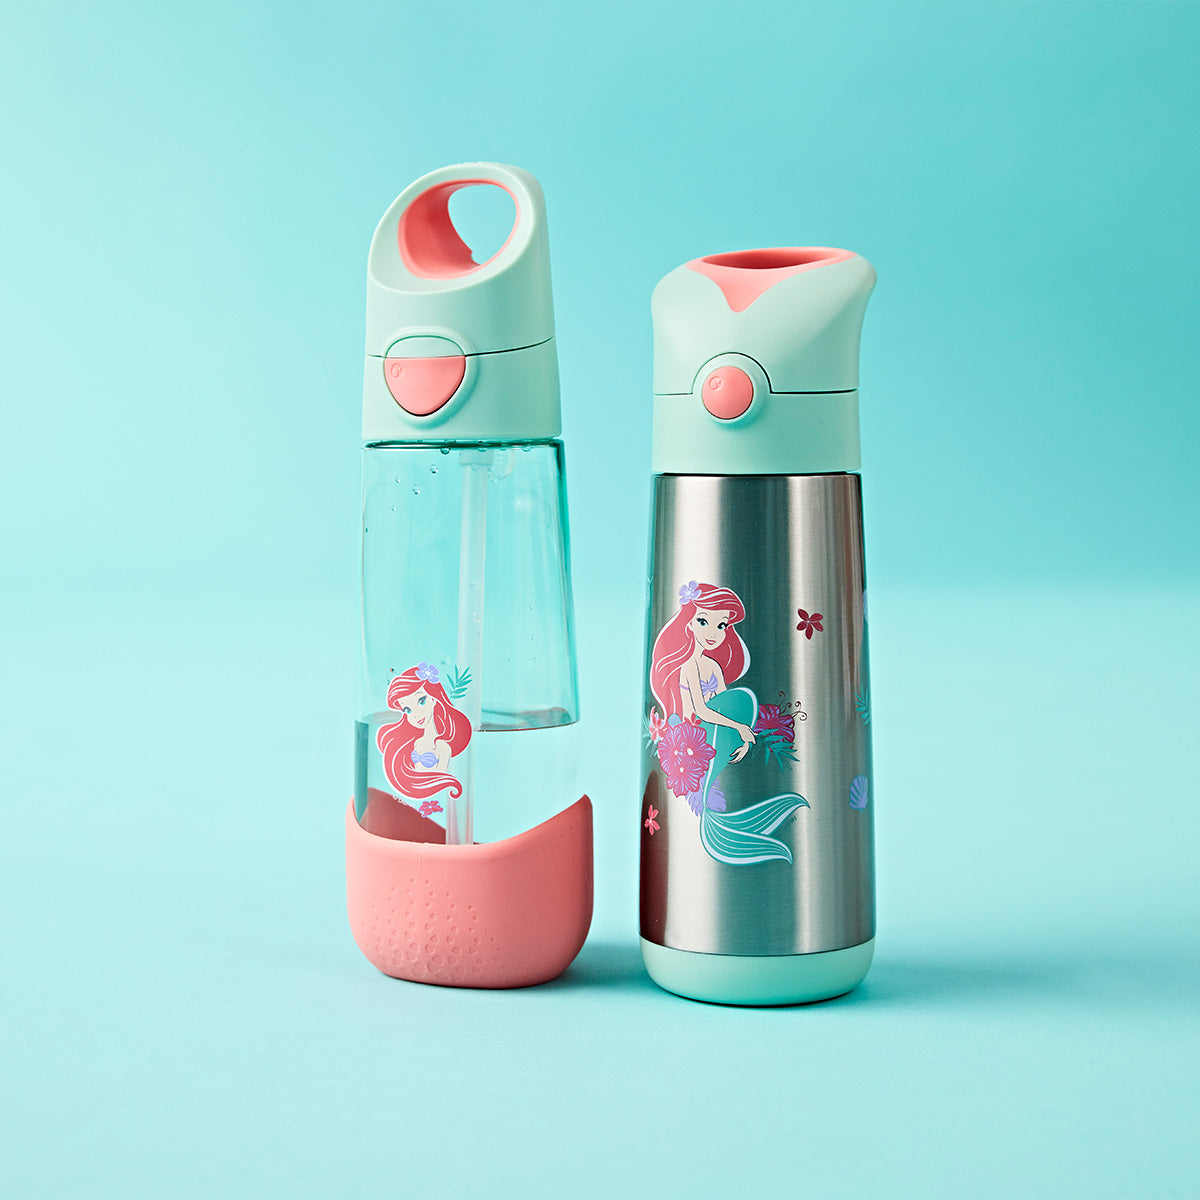 The Little Mermaid insulated drink bottle